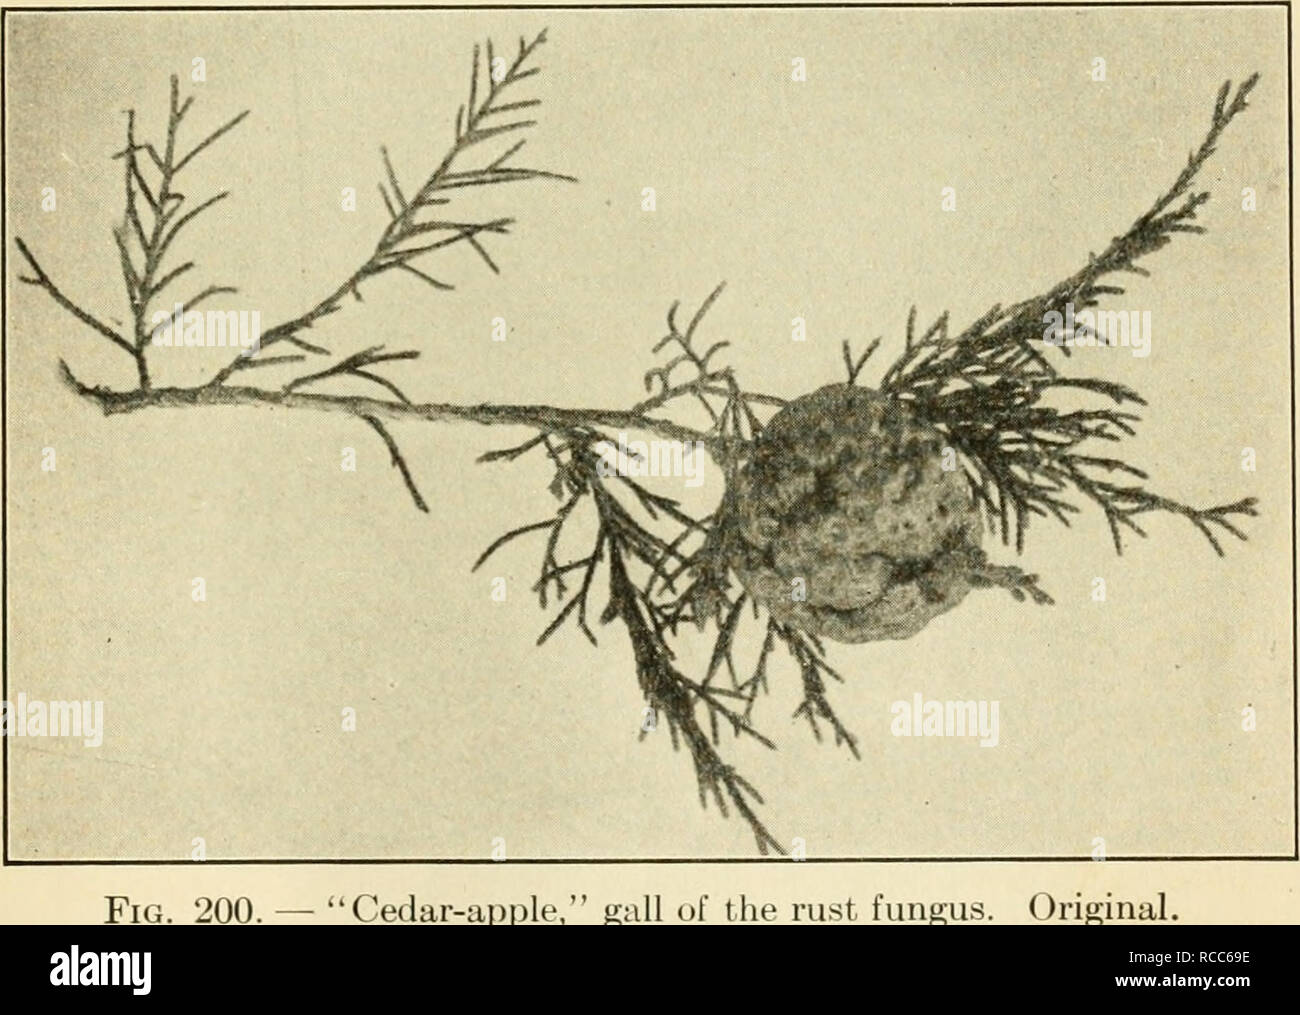 . Diseases of economic plants. Plant diseases. Trees and Timber 383 CEDAR, RED {Juniperus) Rusts ^&quot;^ {Gymnosporangium sps.).—Several distinct species of the parasite occur on Juniperus, some of which produce the usual &quot;cedar-apples,&quot; others produce cankers or witches-brooms on the branches, or spots on the leaves. They are usually of but small significance to the cedar tree itself unless exceptionally abundant. See apple rust.. Fig. 200. — &quot;Cedar-apple,&quot; iingus. Original. White-rot &quot;^&quot;^^ {Fomes juniperinus v. Sch.). — In this dis- ease holes appear in the hea Stock Photo